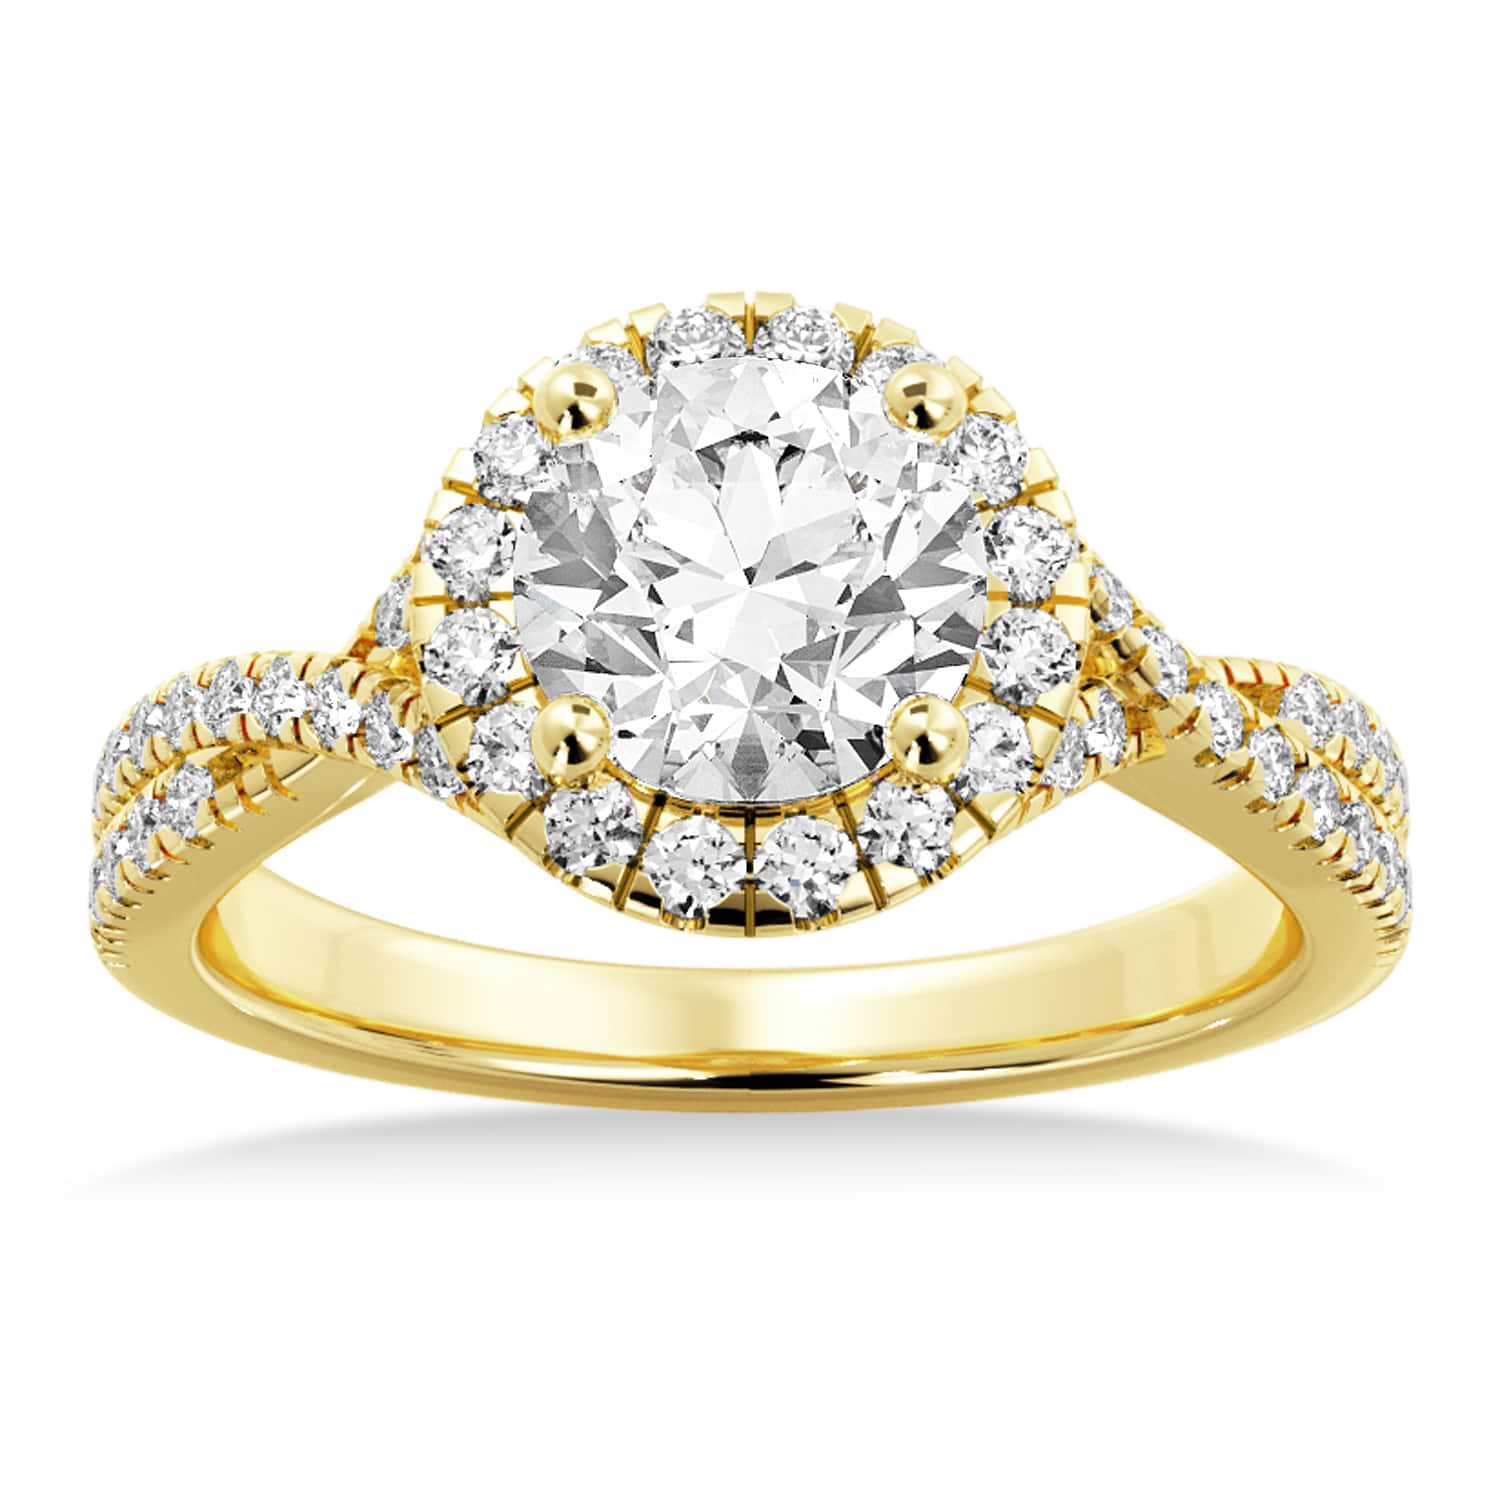 Twisted Diamond Halo Engagement Ring 14k Yellow Gold (0.47ct)